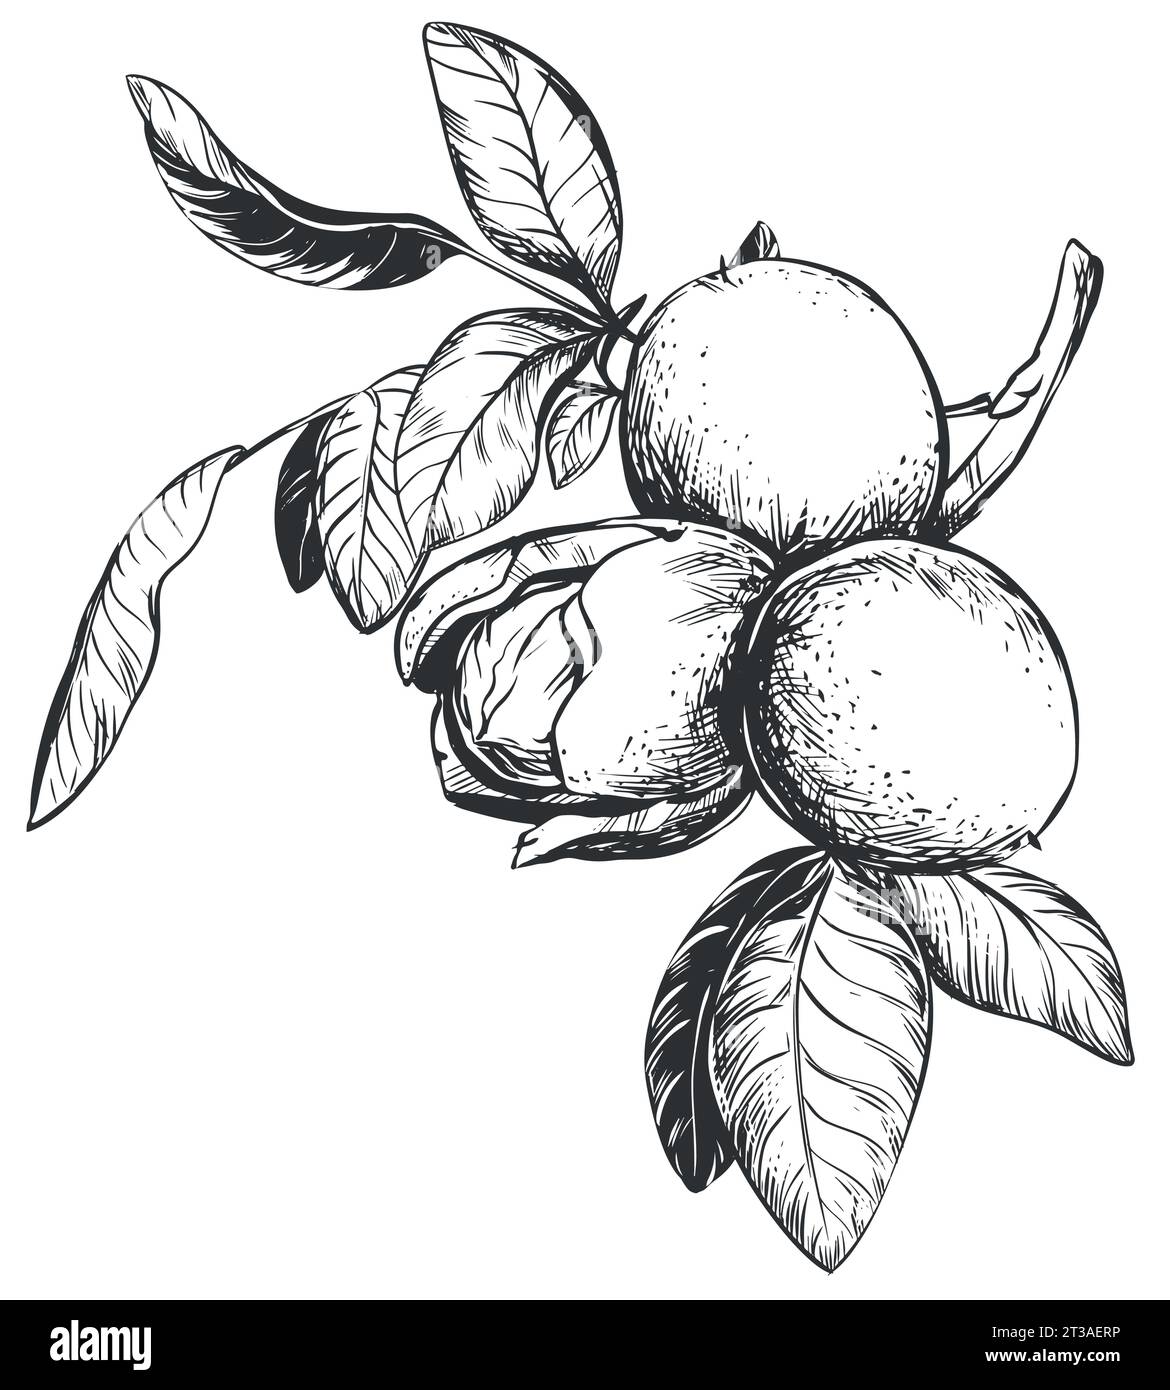 Walnuts are hand drawn. Vector illustration in engraving technique. Ingredient for nut paste, butter, Nocino liqueur. For packaging design. Linear ink Stock Vector